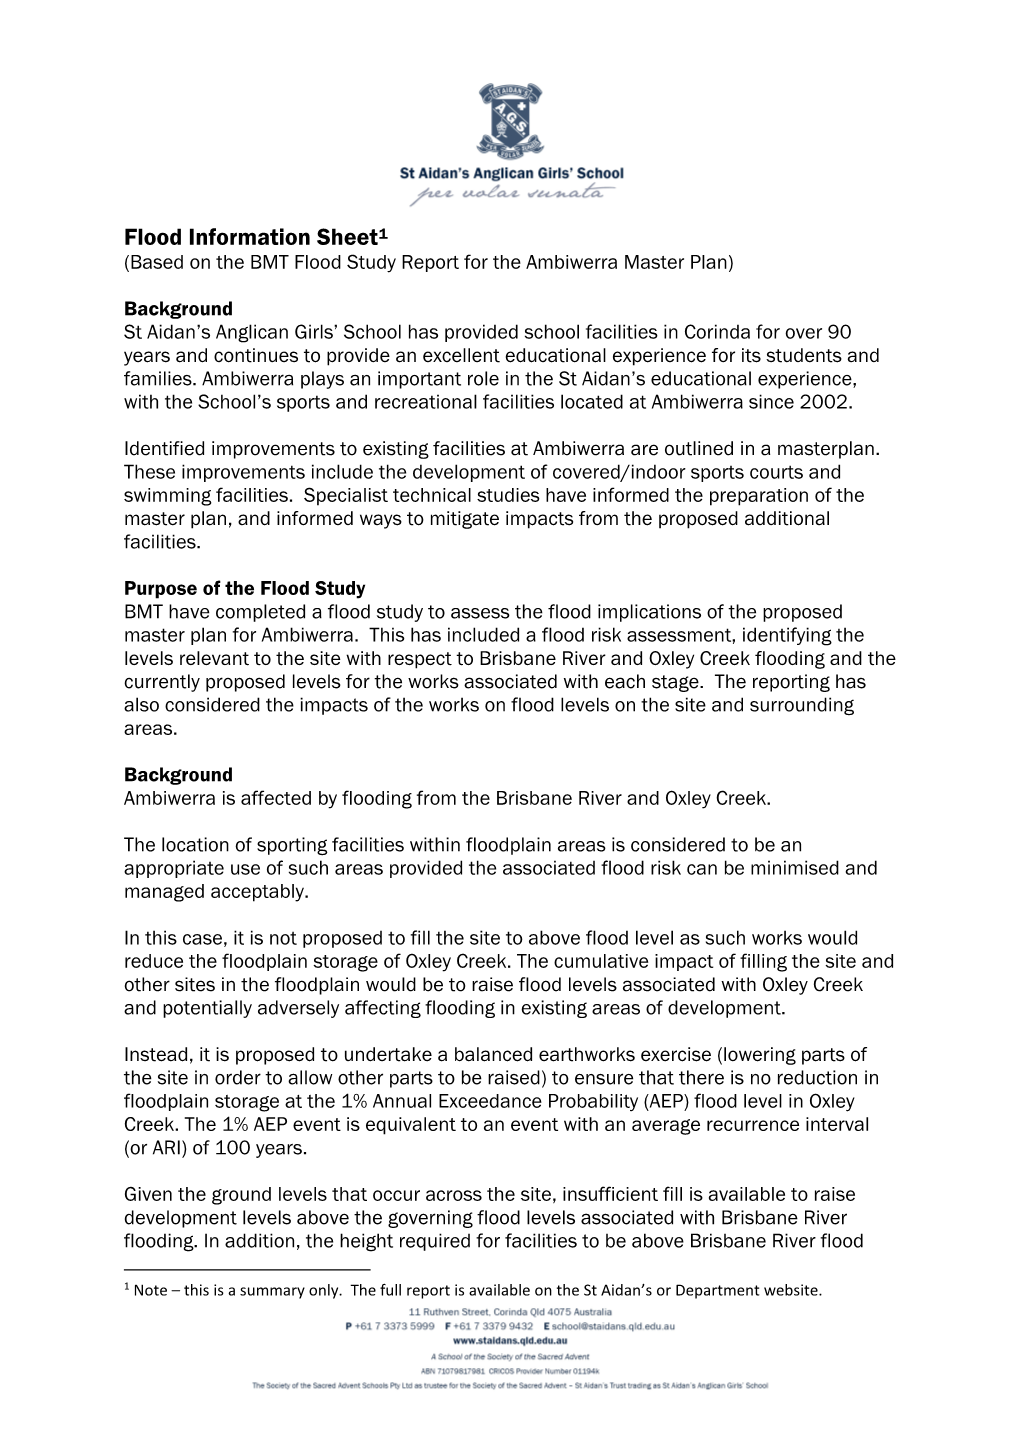 Flood Information Sheet1 (Based on the BMT Flood Study Report for the Ambiwerra Master Plan)